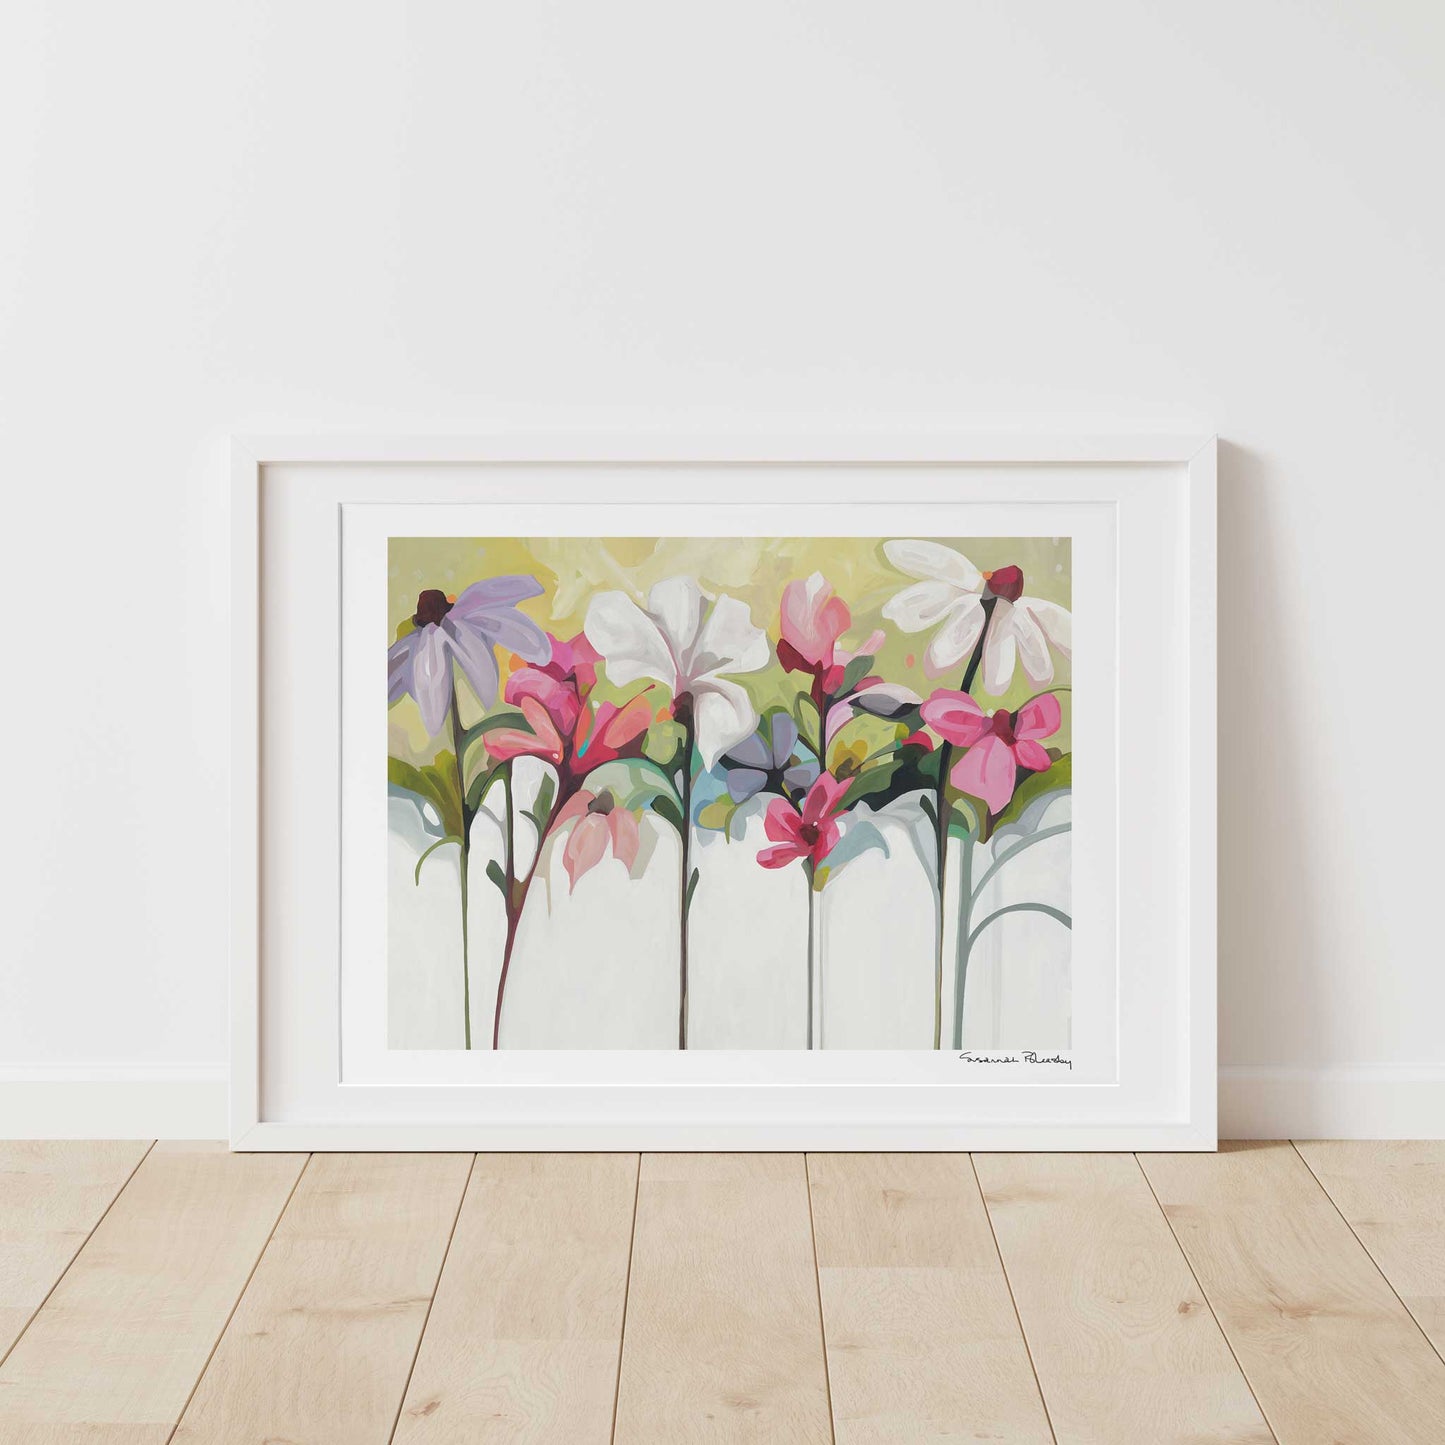 Horizontal acrylic flower painting print of vibrant garden flowers framed and leaning against wall